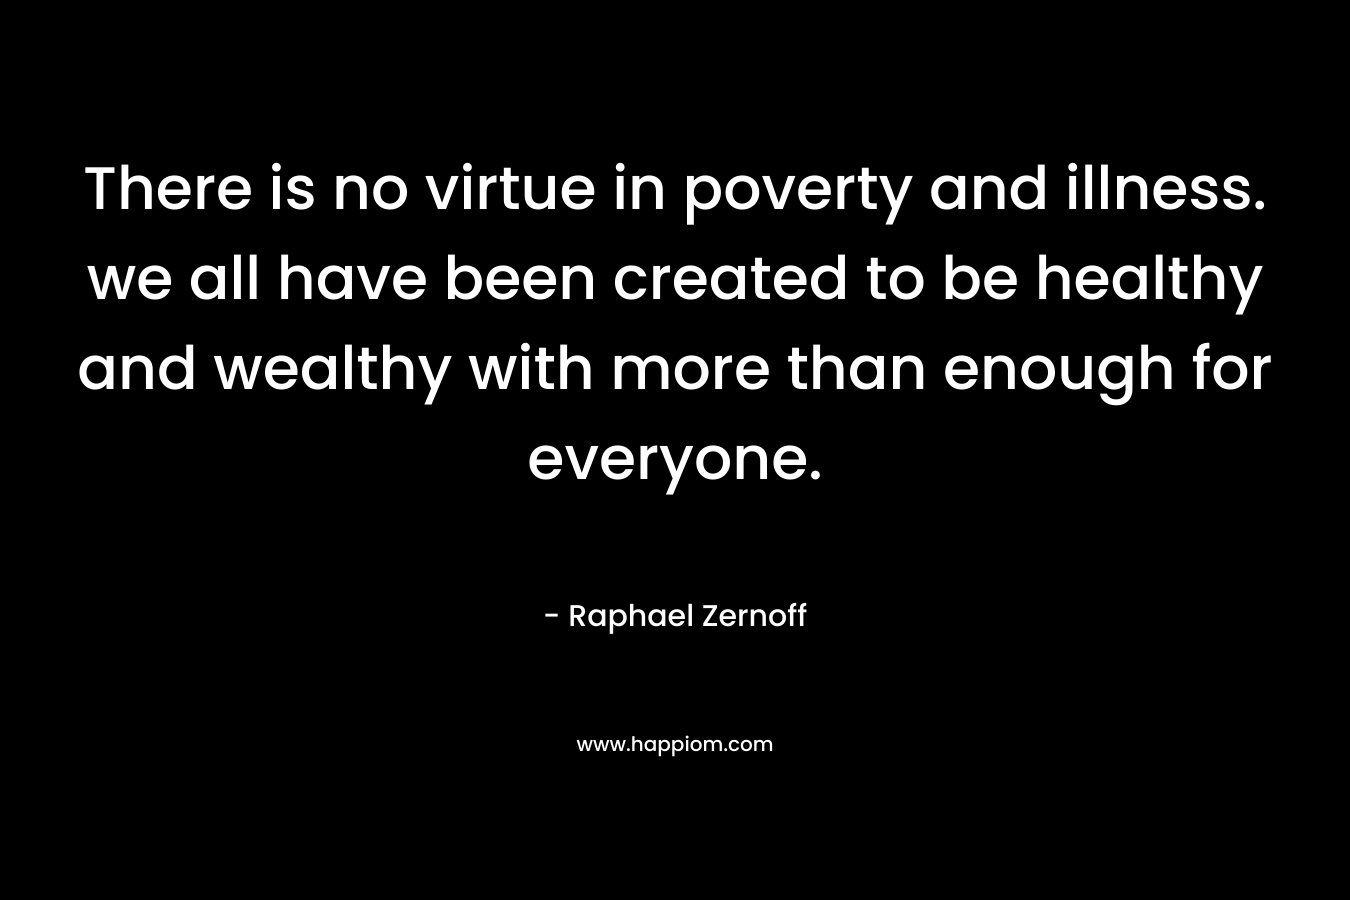 There is no virtue in poverty and illness. we all have been created to be healthy and wealthy with more than enough for everyone.